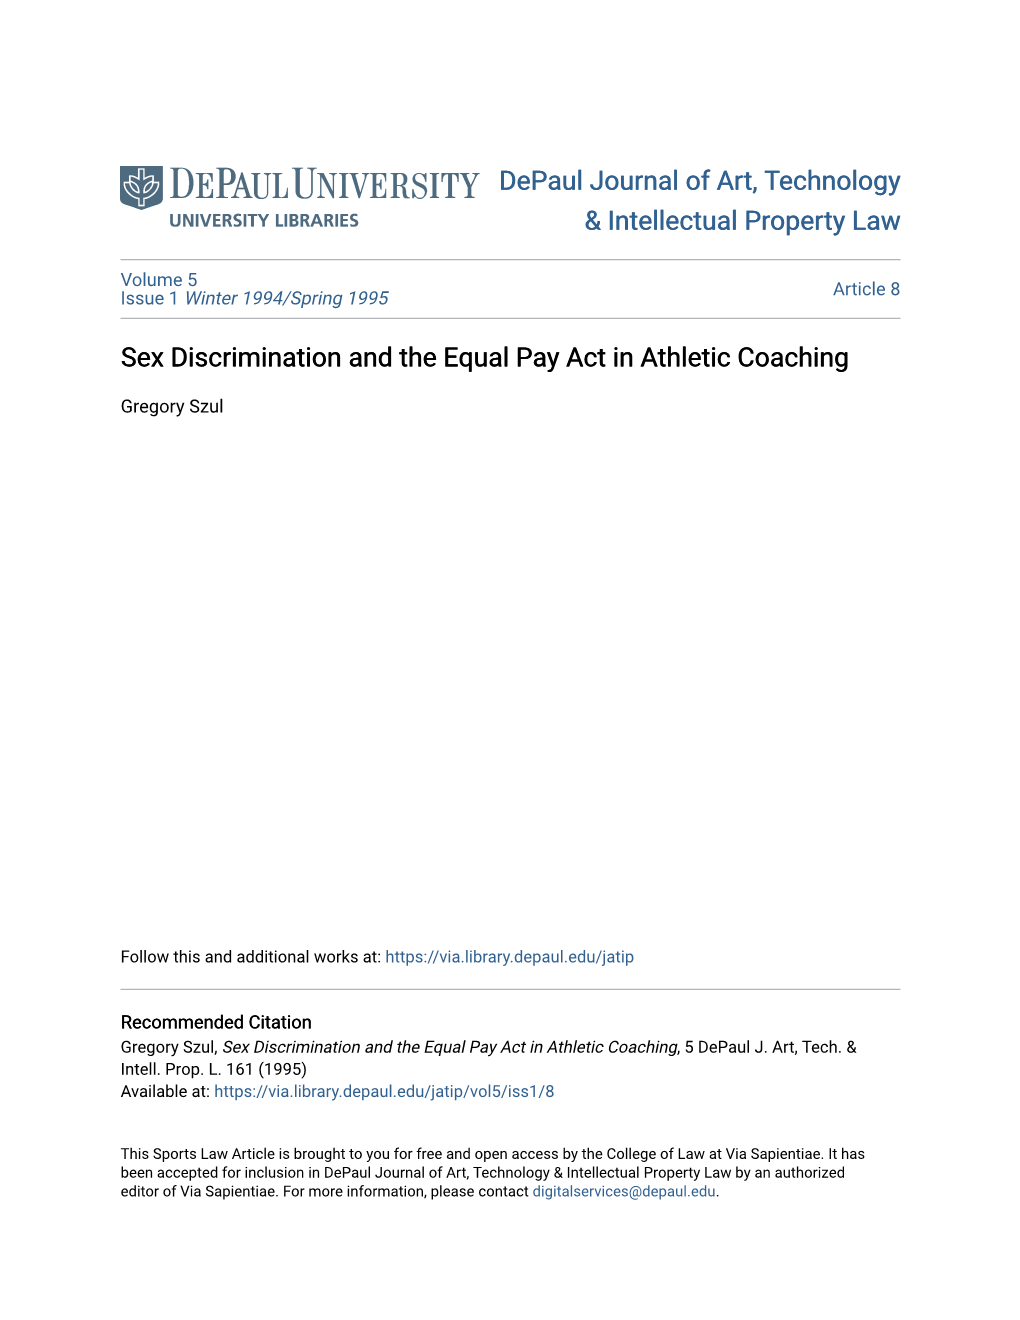 Sex Discrimination and the Equal Pay Act in Athletic Coaching